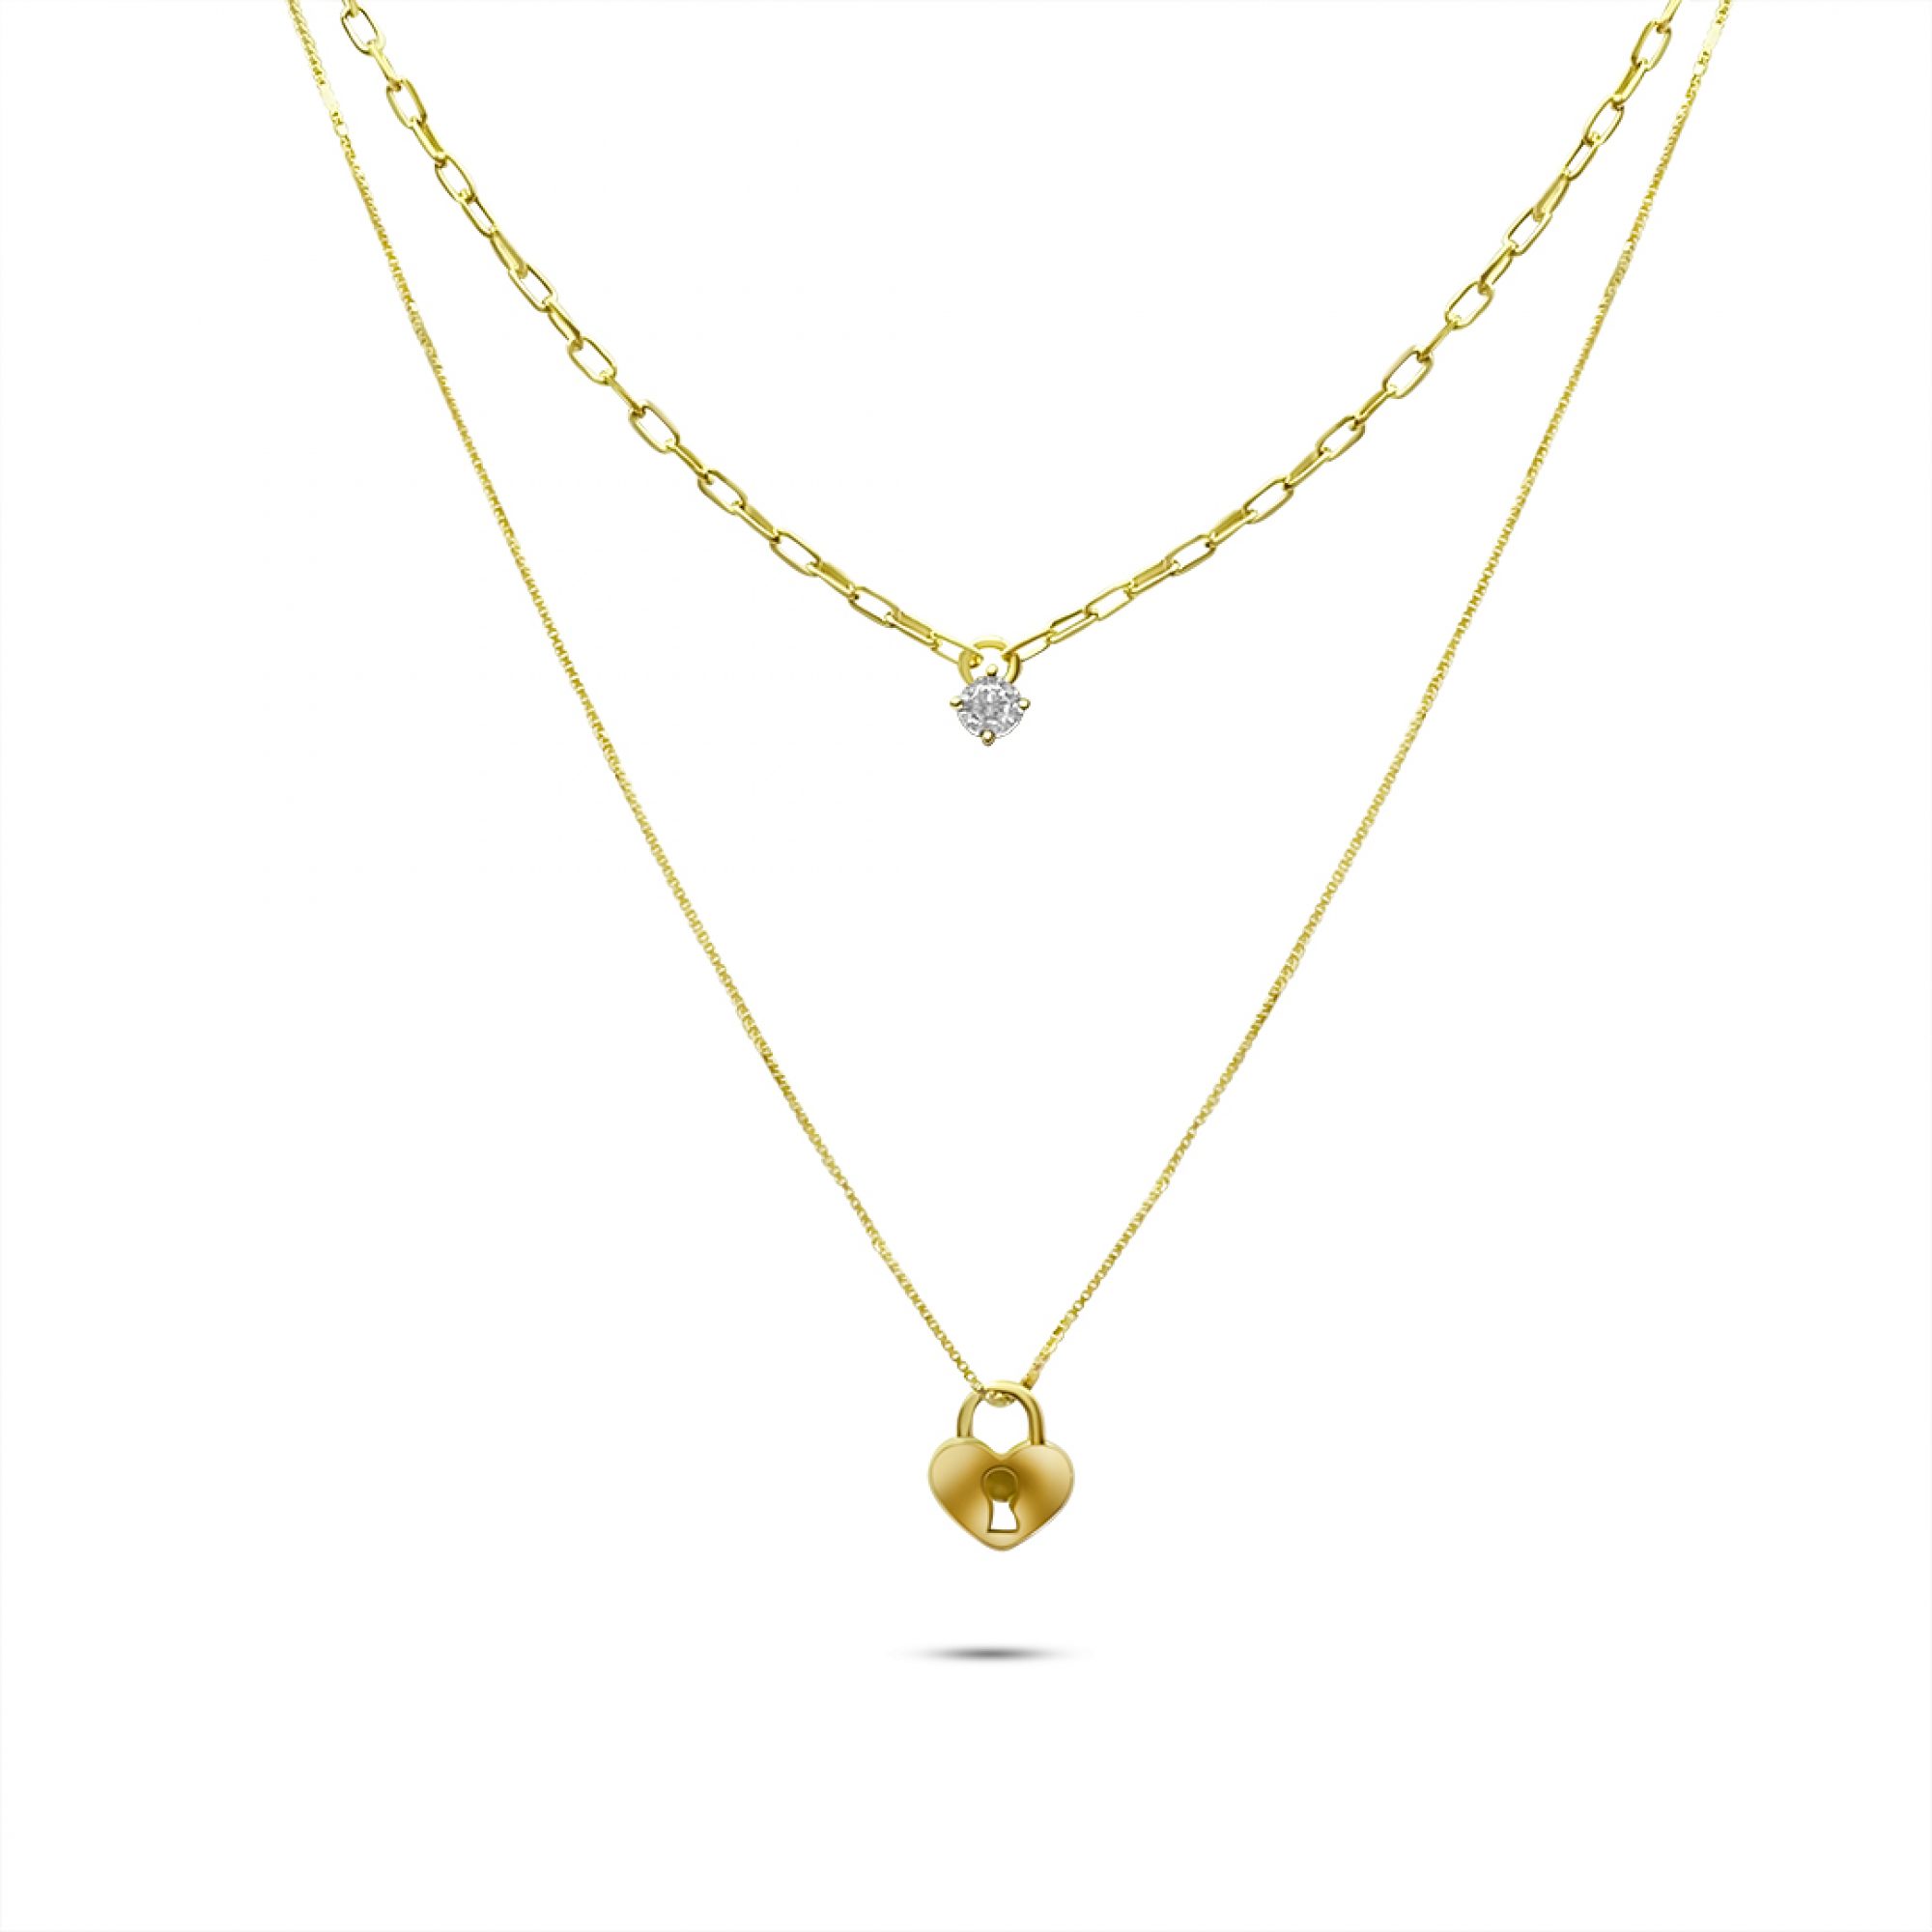 Double gold plated necklace with zircon stone